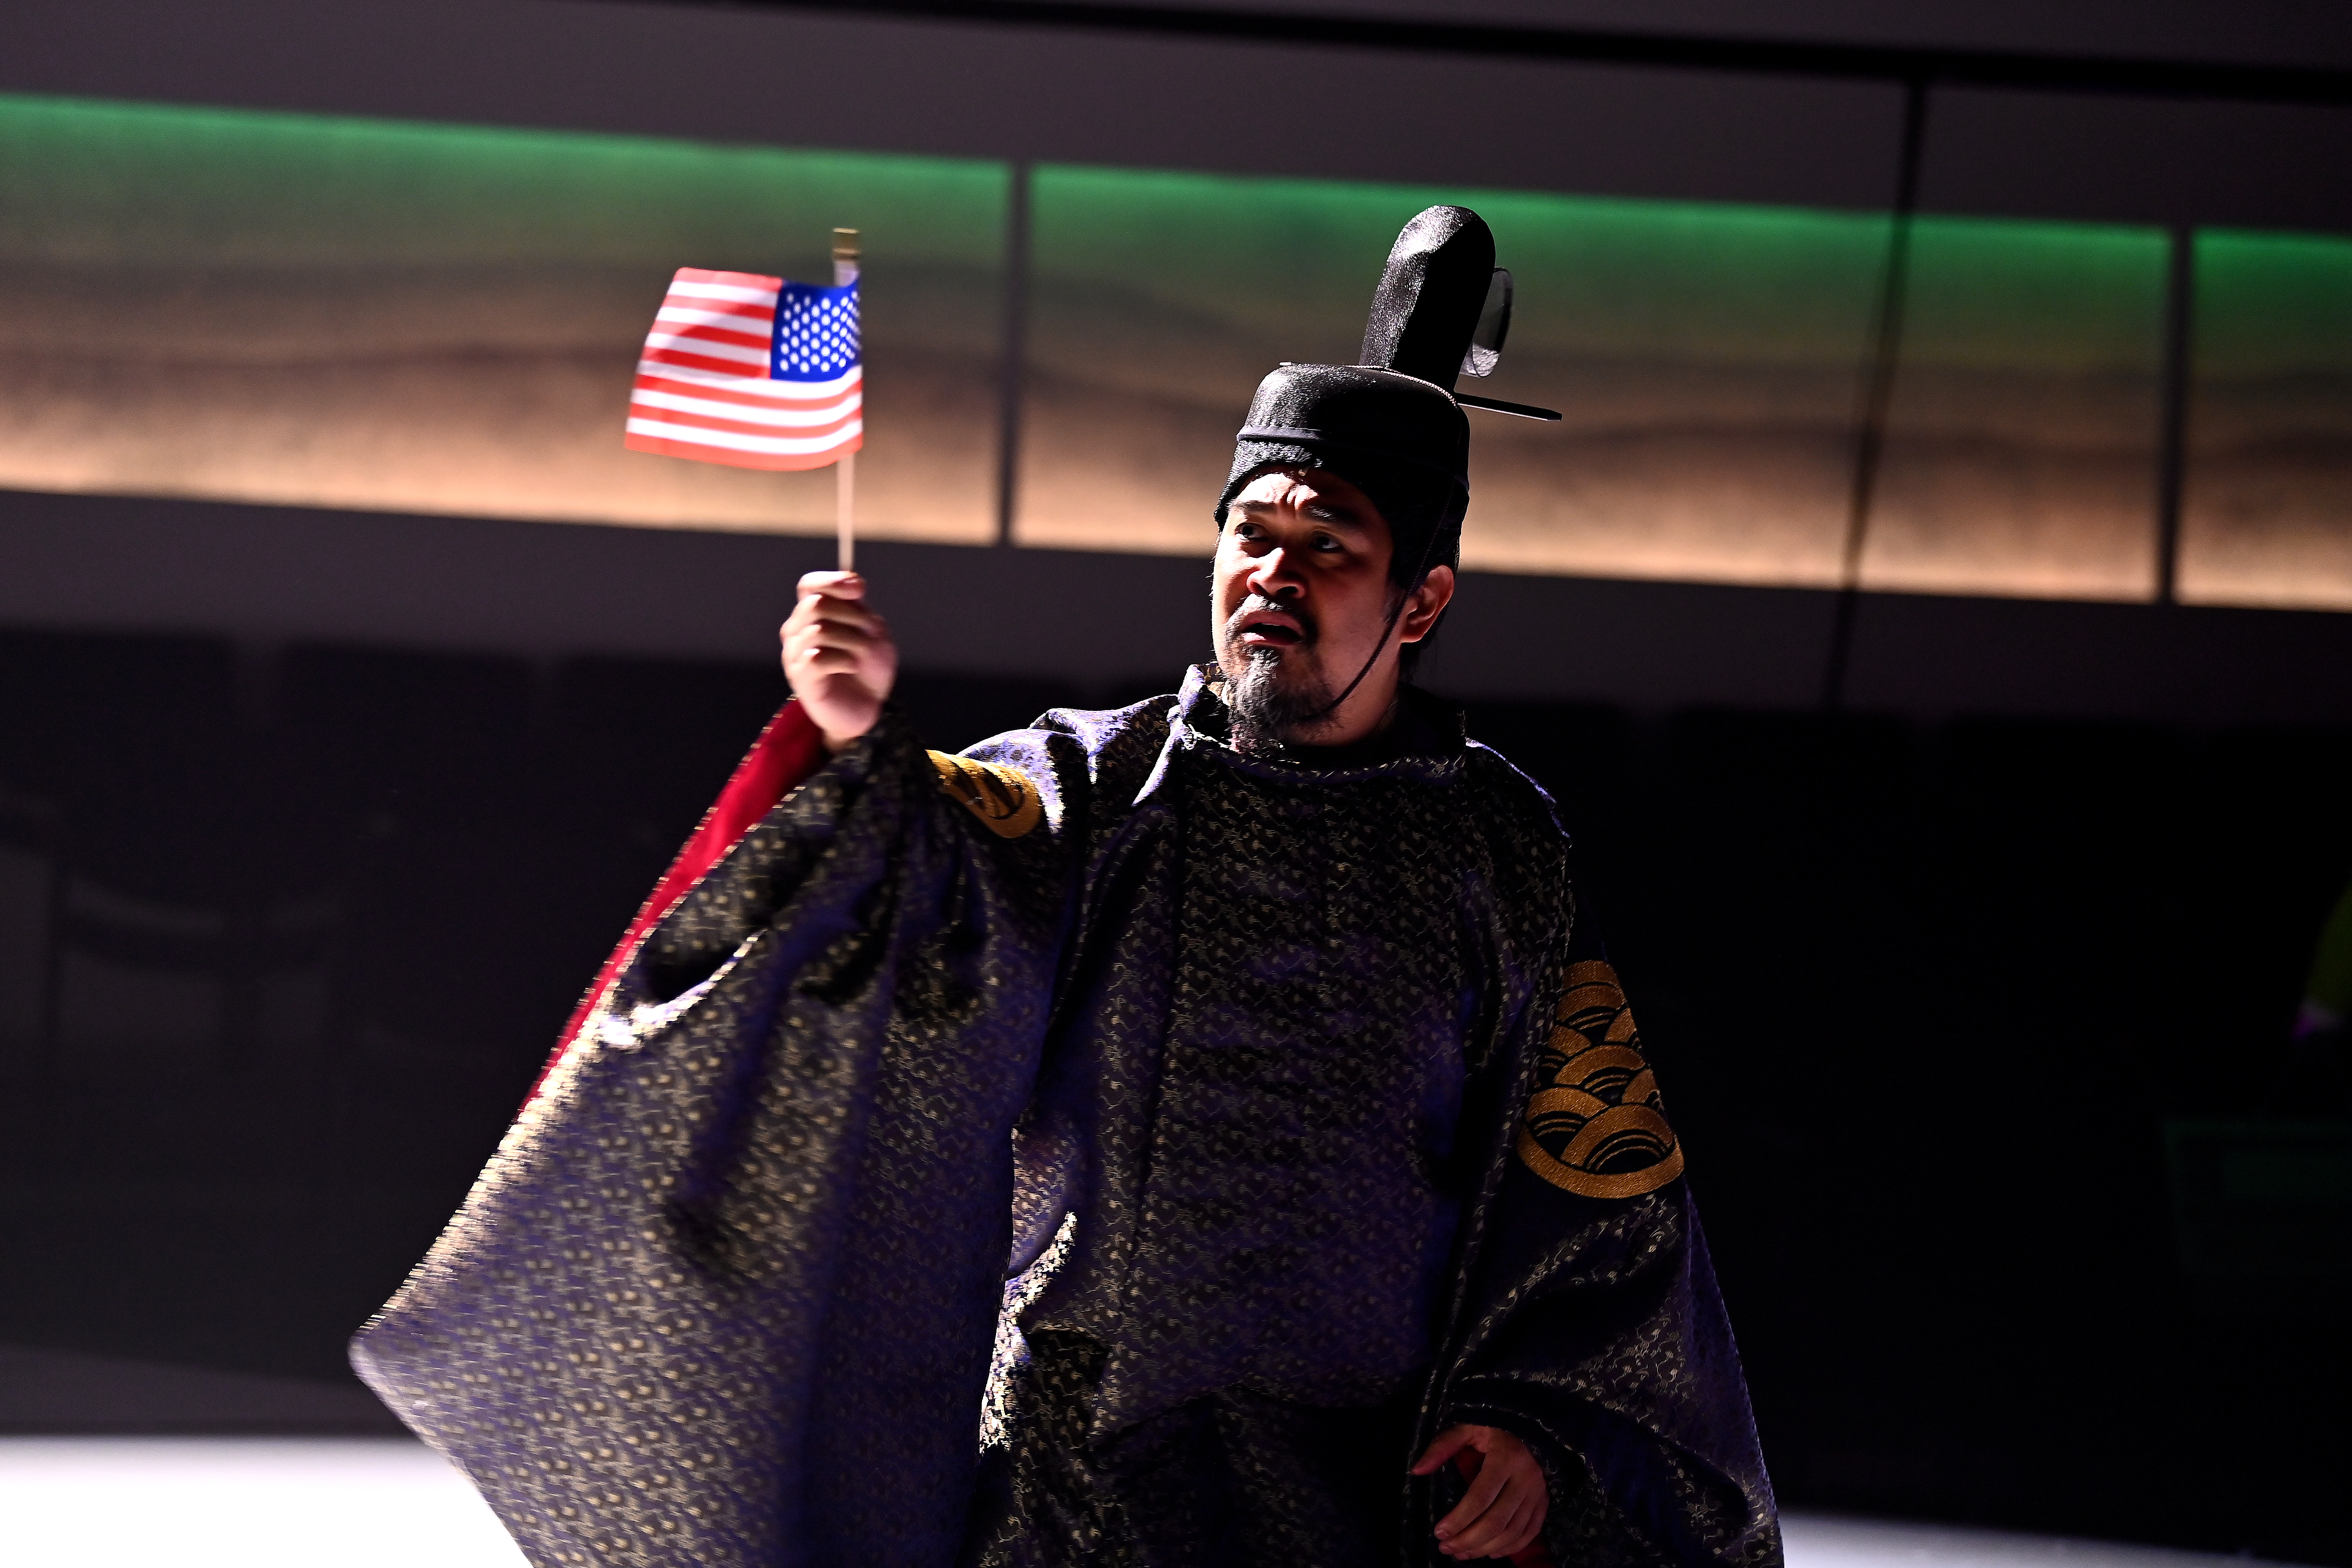 Production photo from Pacific Overtures at Signature Theatre